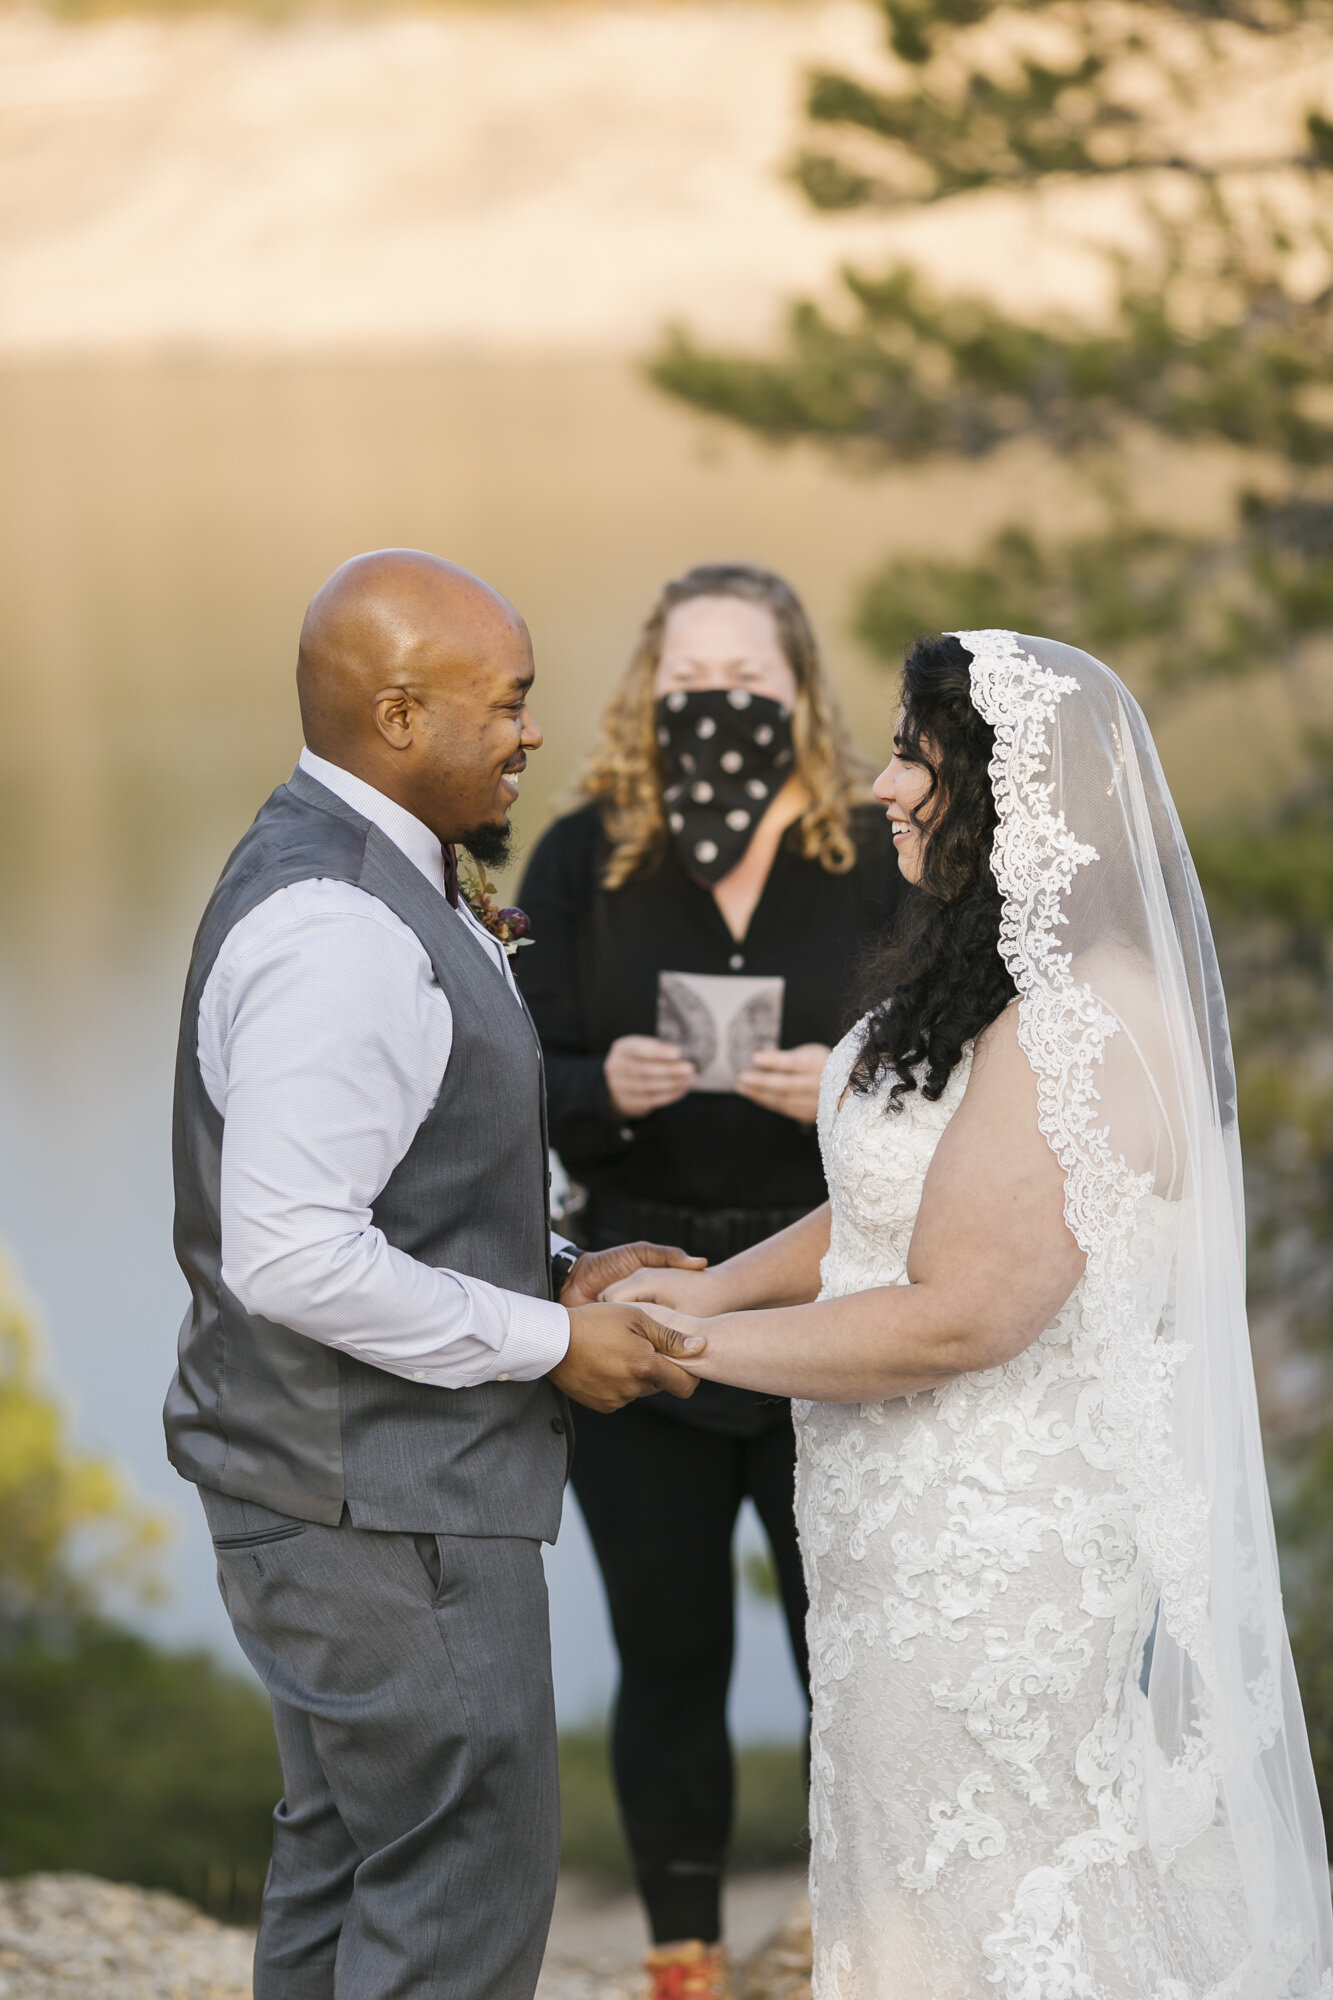 Wedding photographer Natalie Ngo steps in as officiant to pronounce the bride and groom married in the Tahoe forest in California